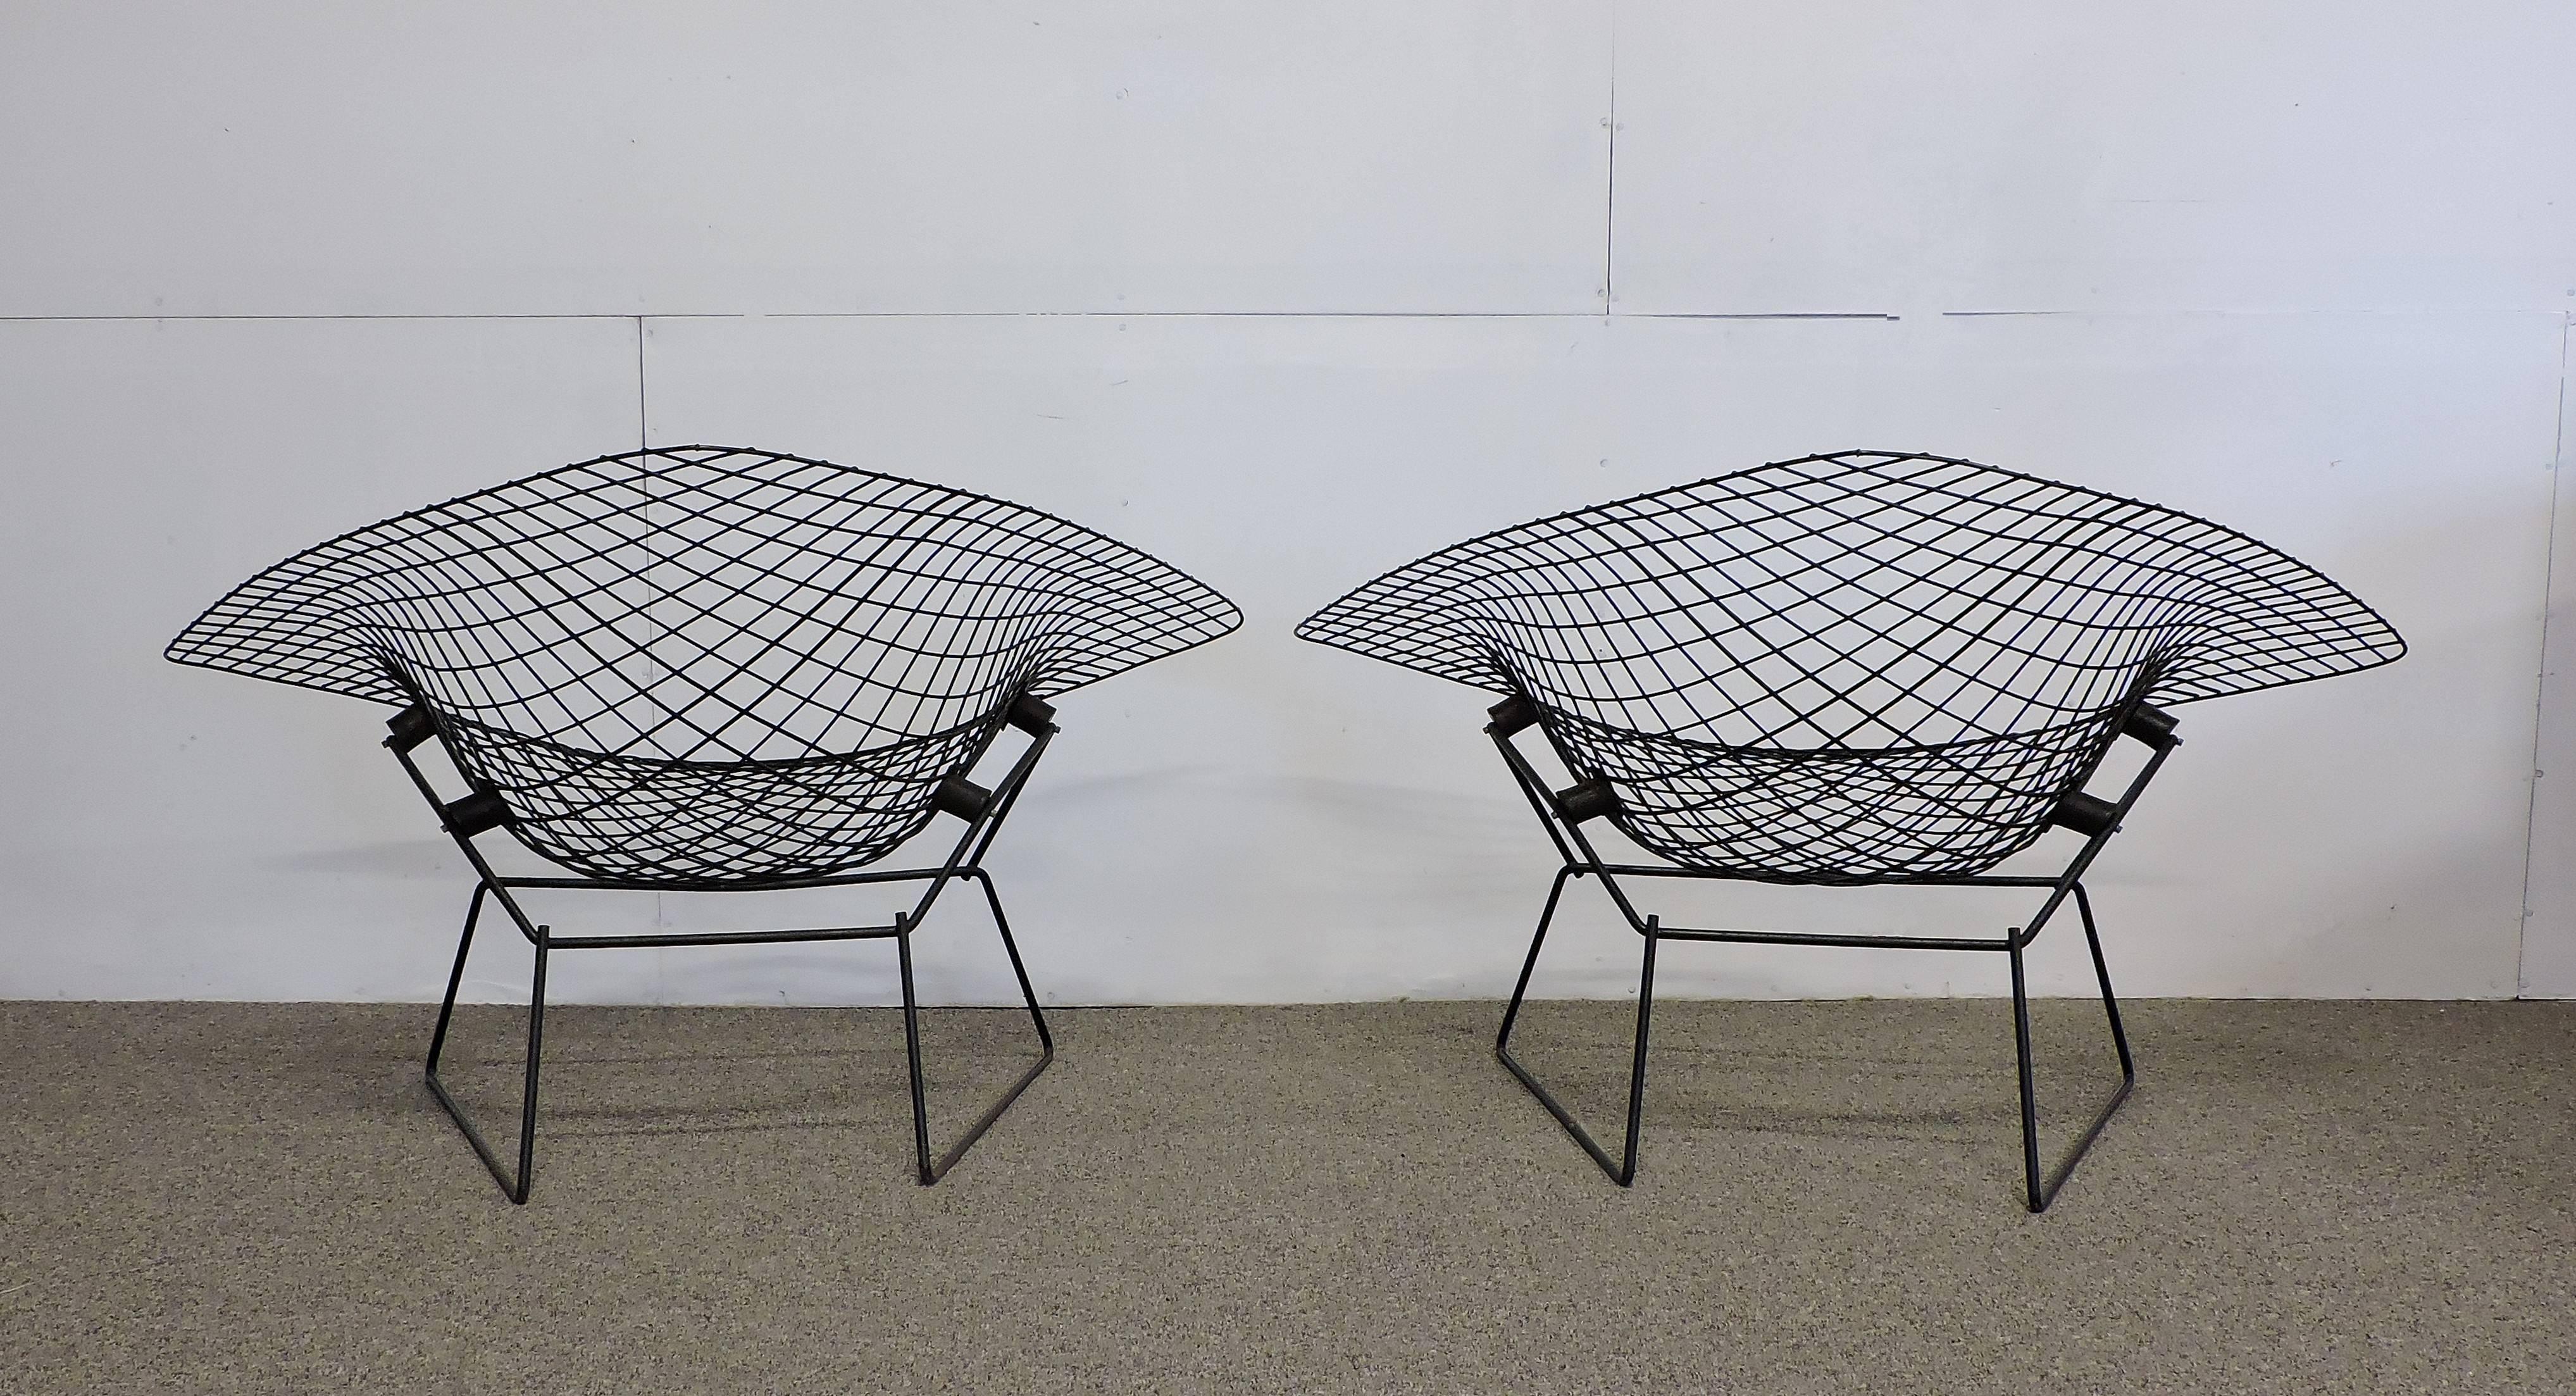 Super cool original large diamond chair designed by Harry Bertoia and manufactured by Knoll. This is the larger version of the diamond chair and has rubber shock mounts so that it can rock. The original black paint is in very good condition with